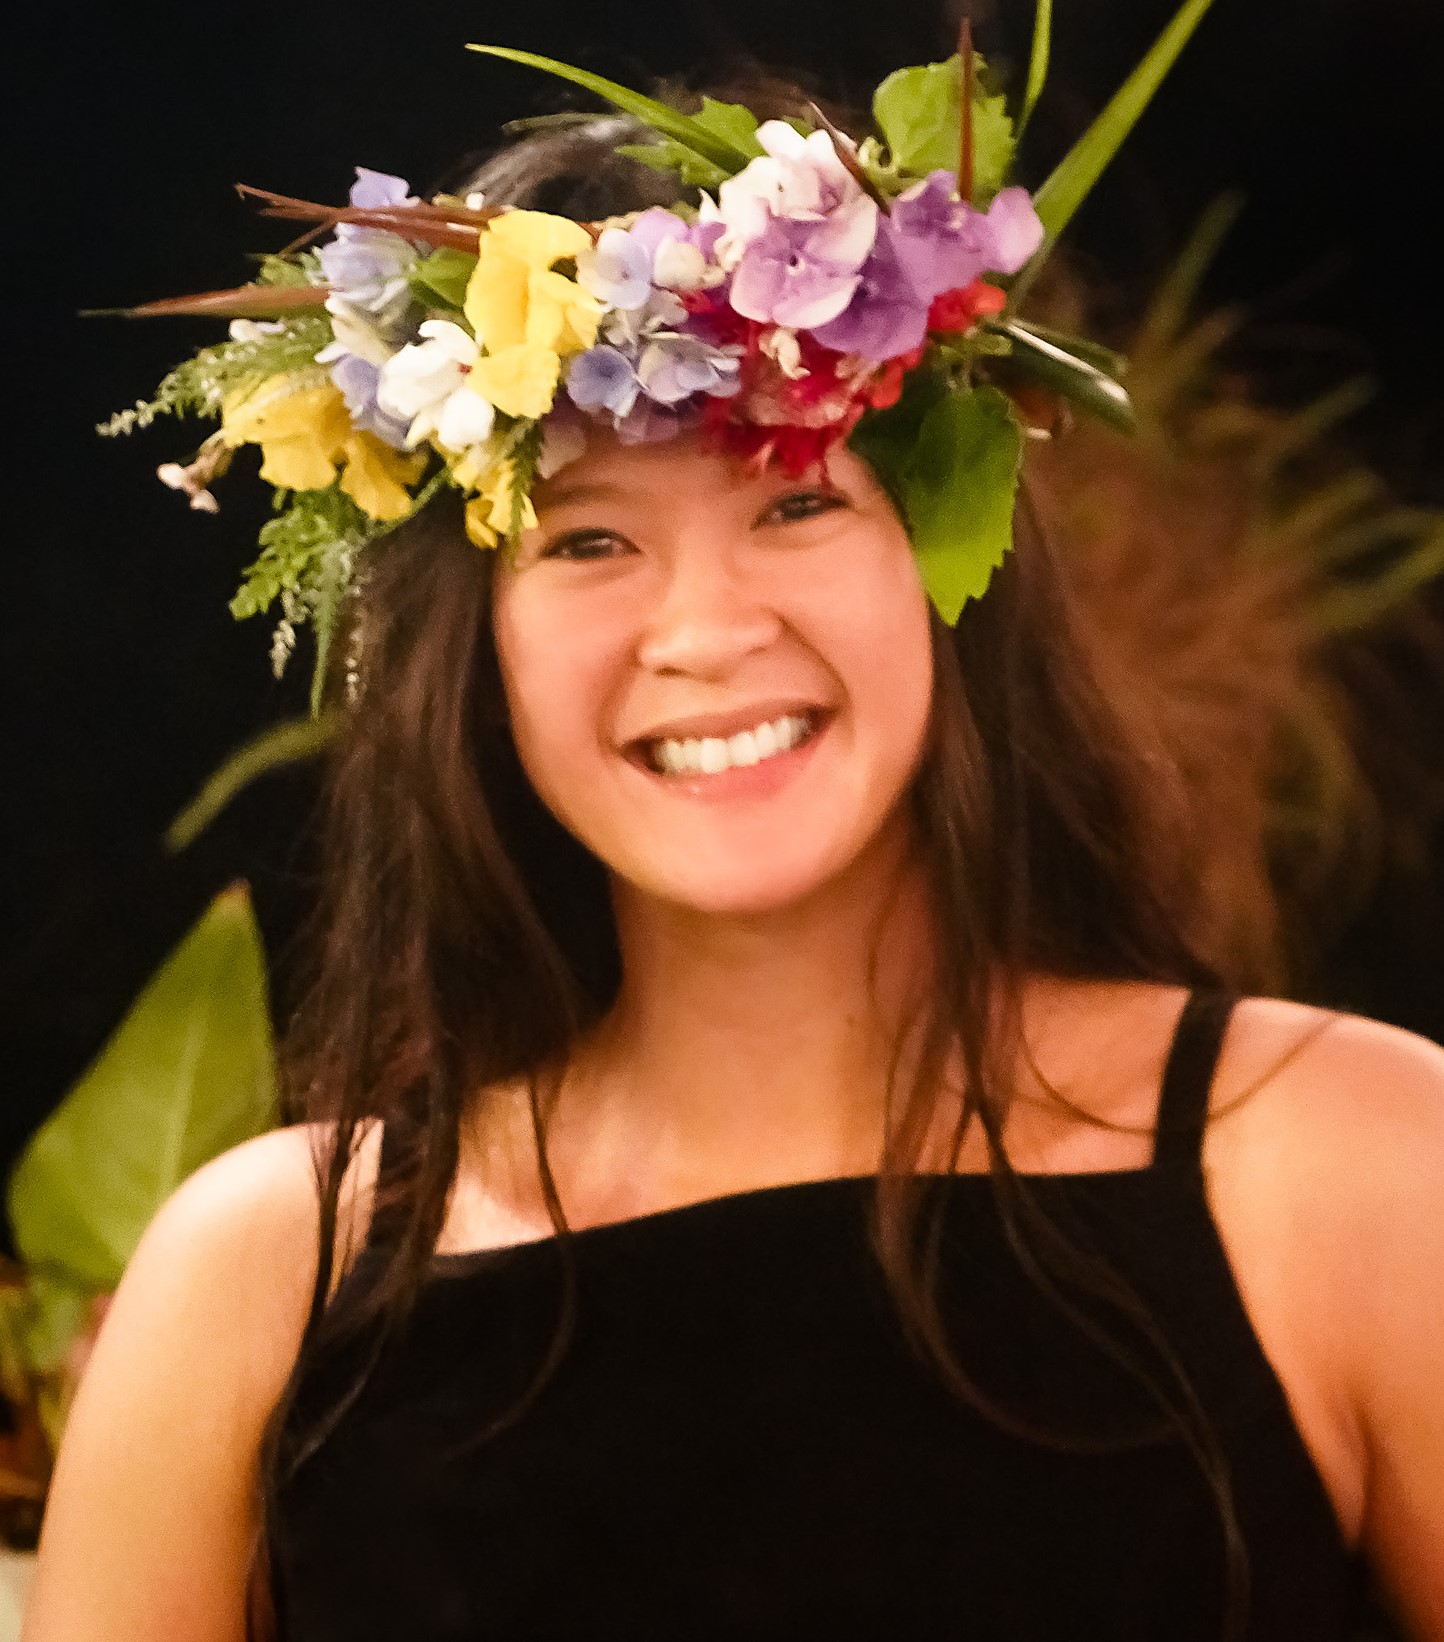 Young woman with brown hair and a lei around her head